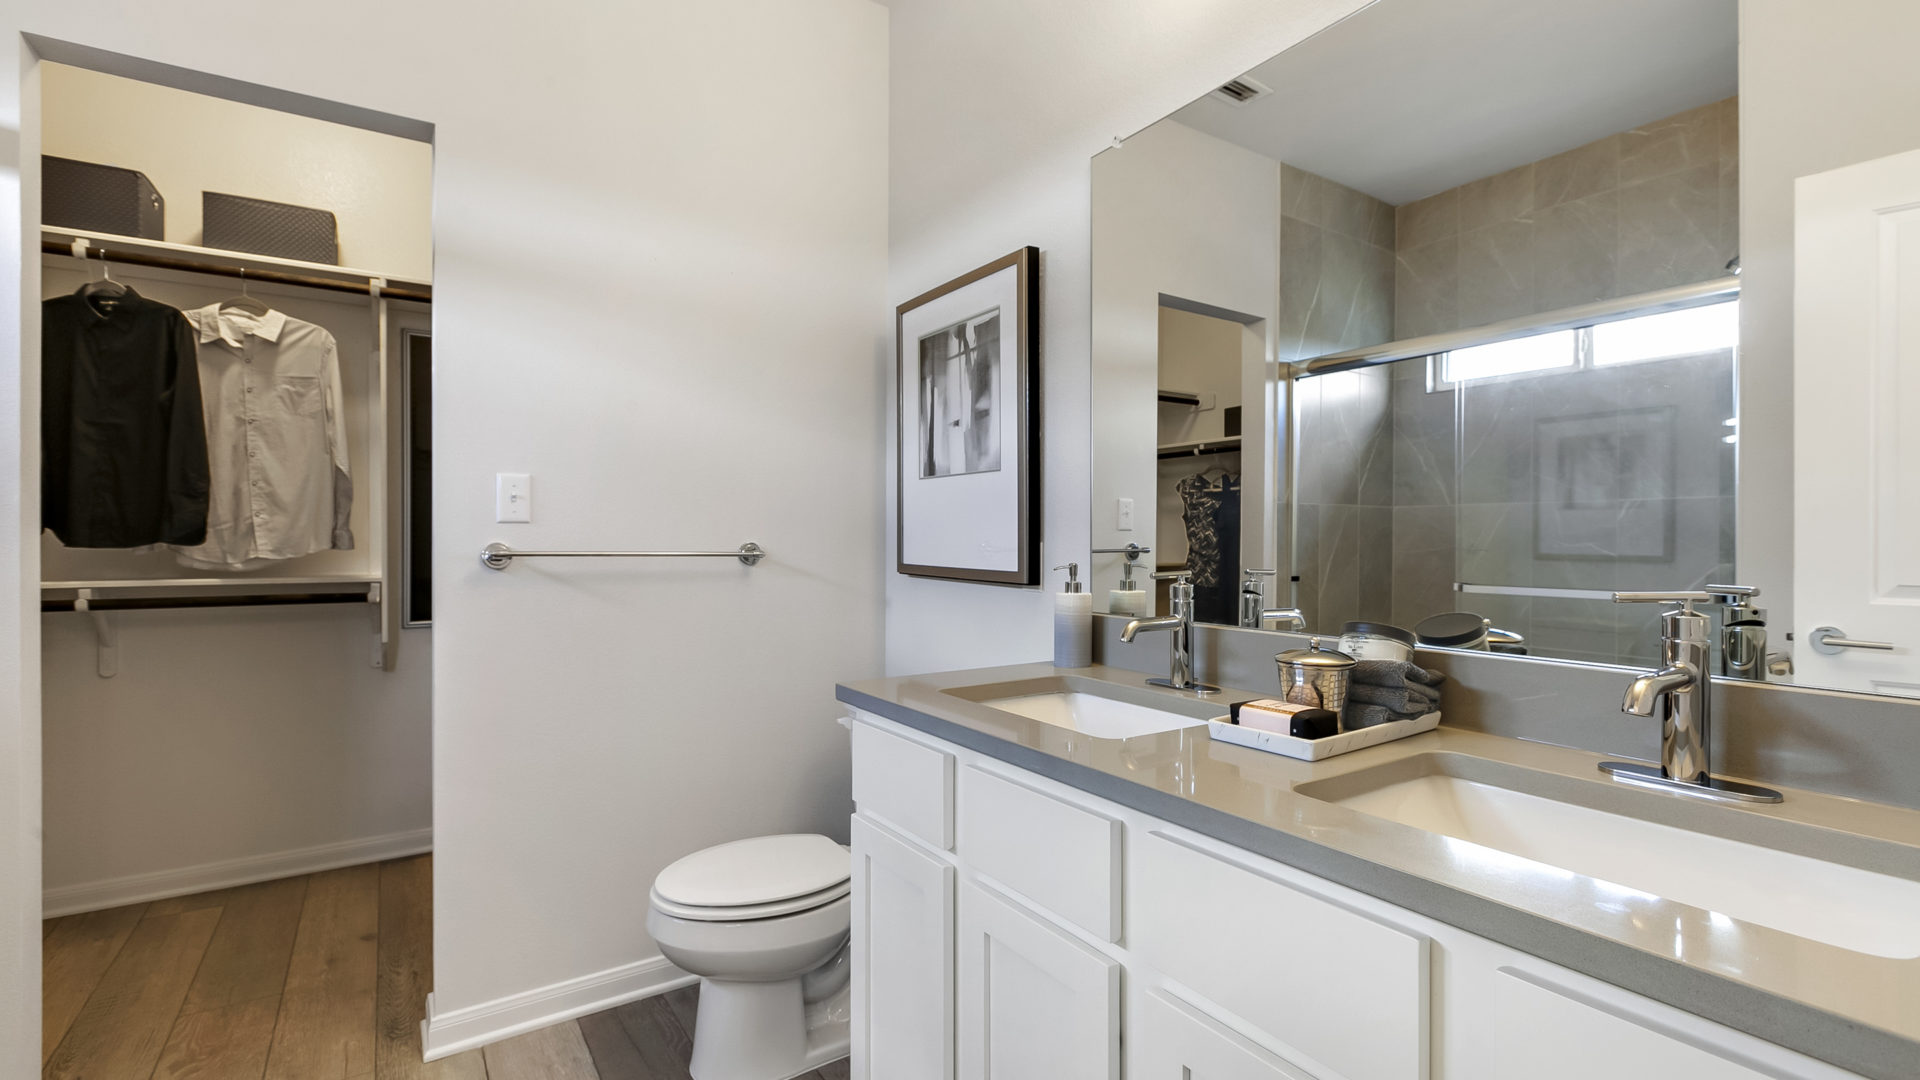 Trace Community Model Home Master Bathroom With Walk-in Closet TRACE New Homes in San Marcos